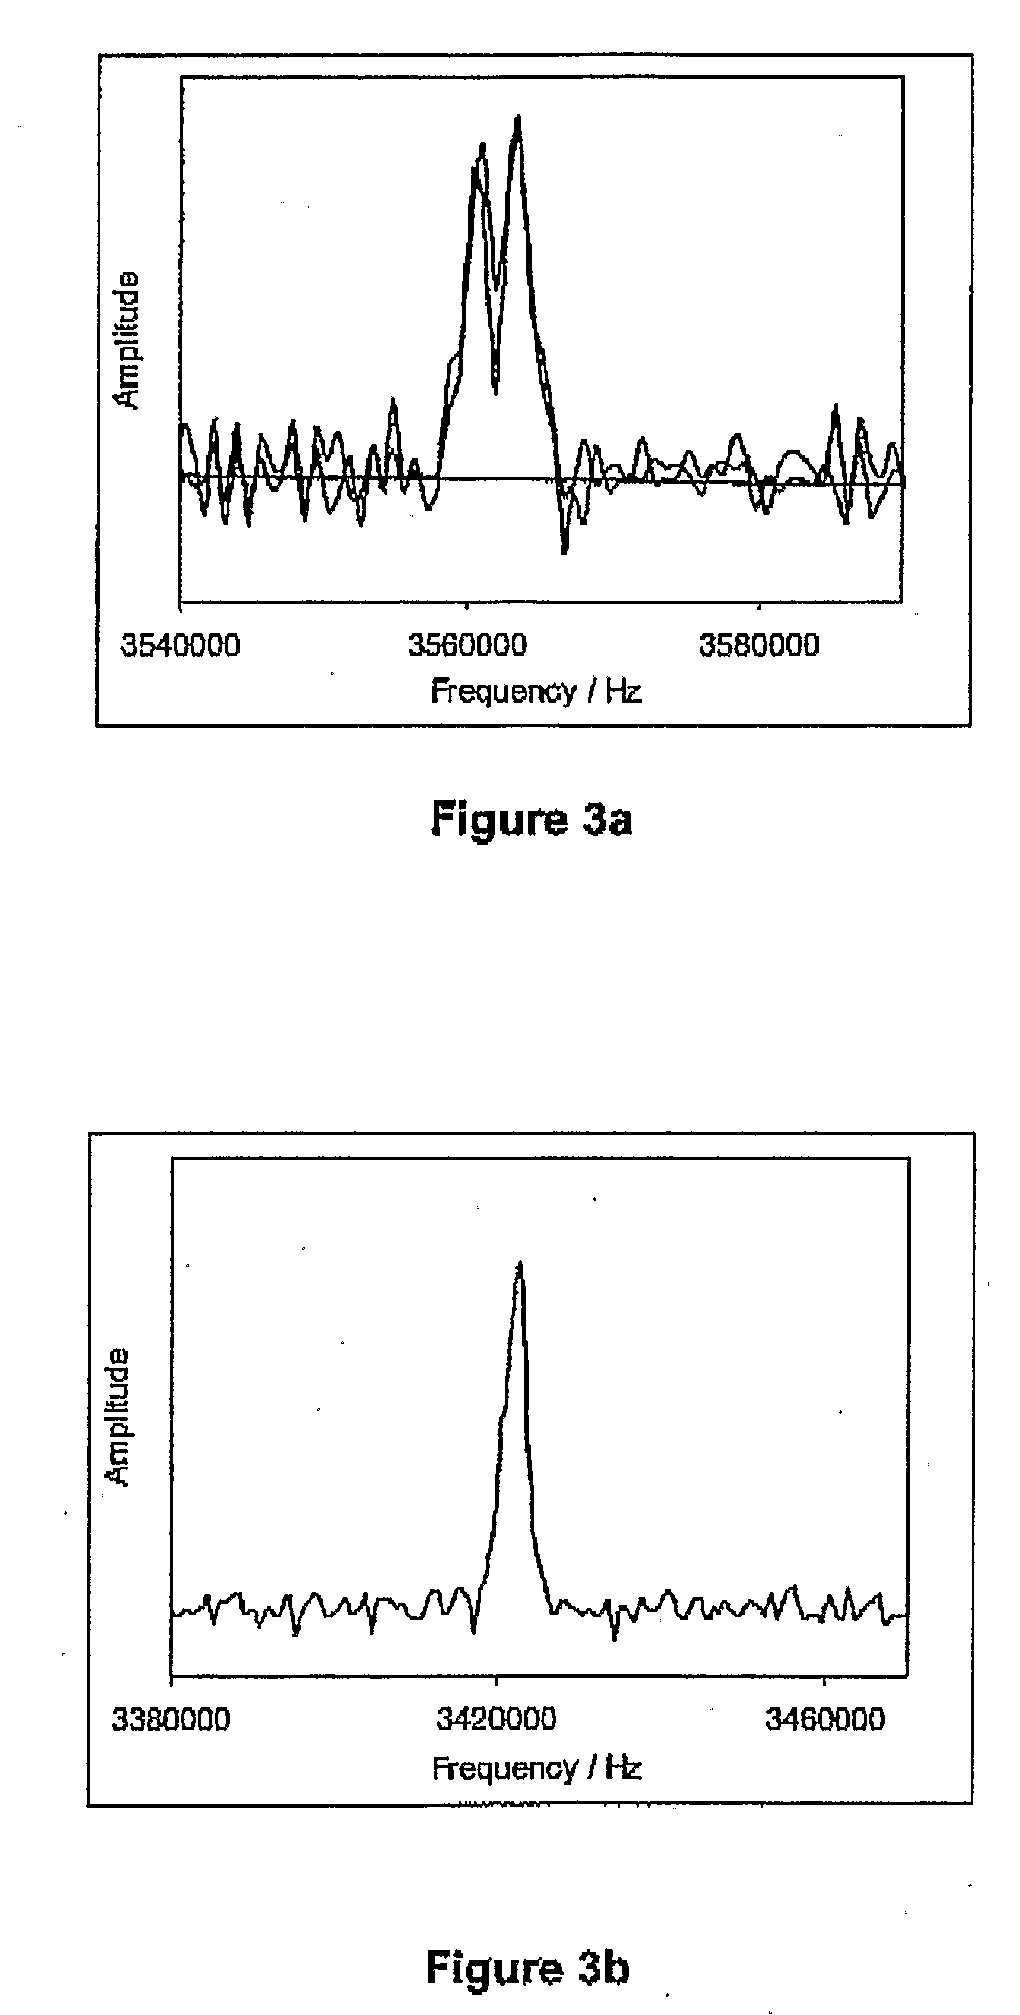 System and Method for Improving the Analysis of Chemical Substances Using Nqr